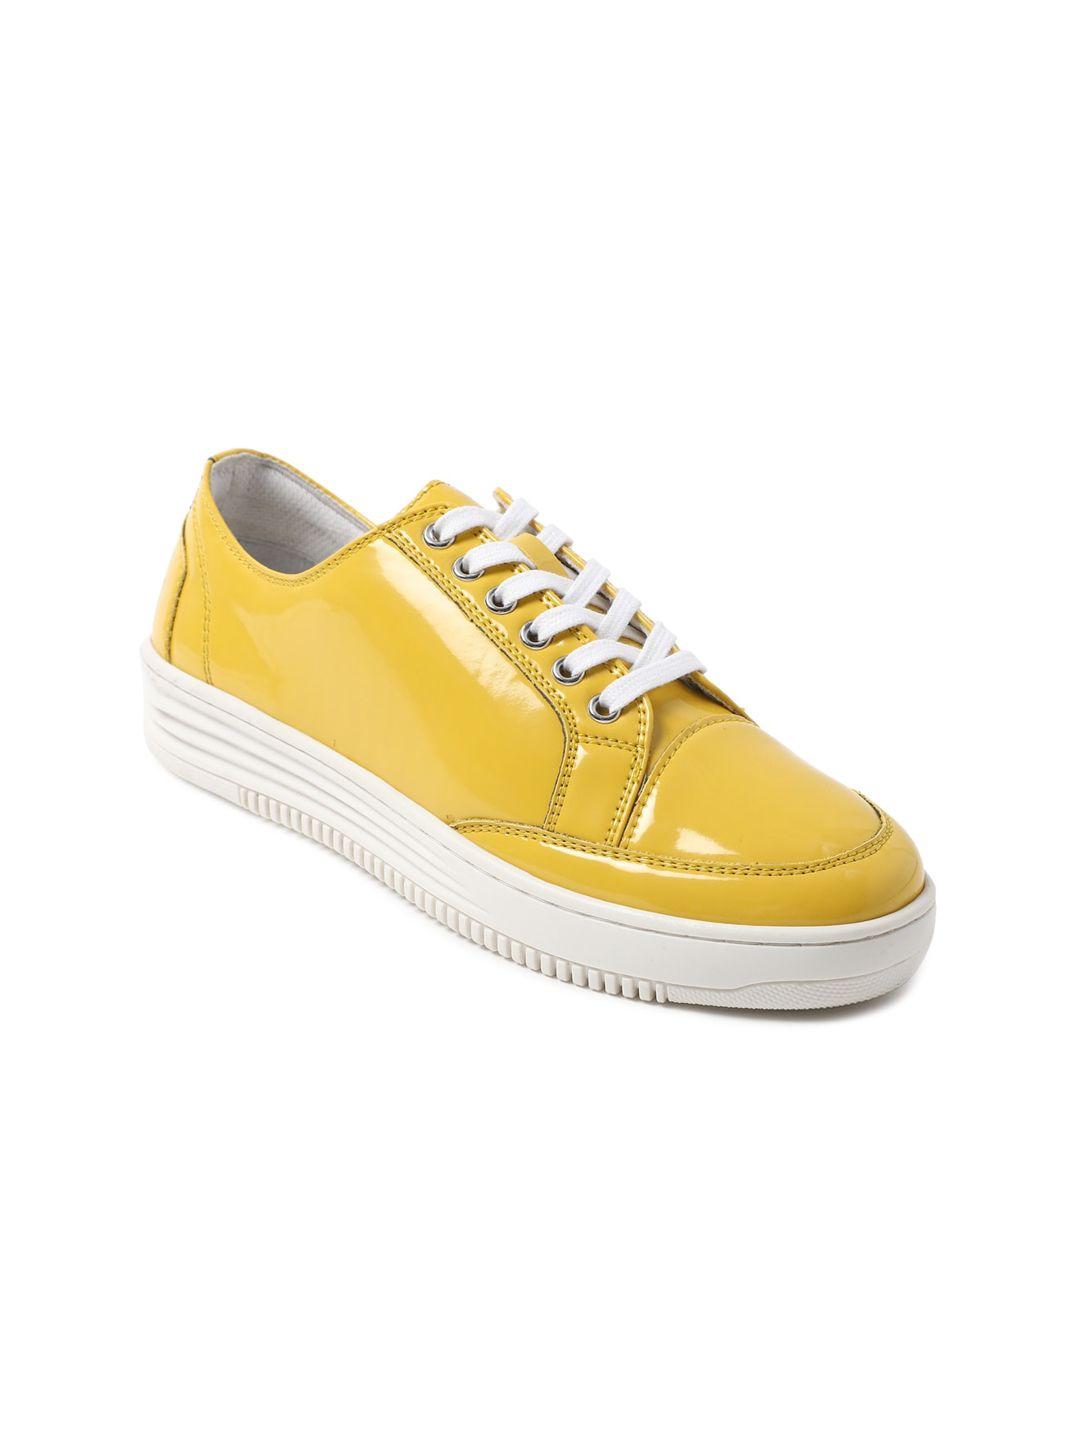 forever 21 women yellow solid pu sneakers